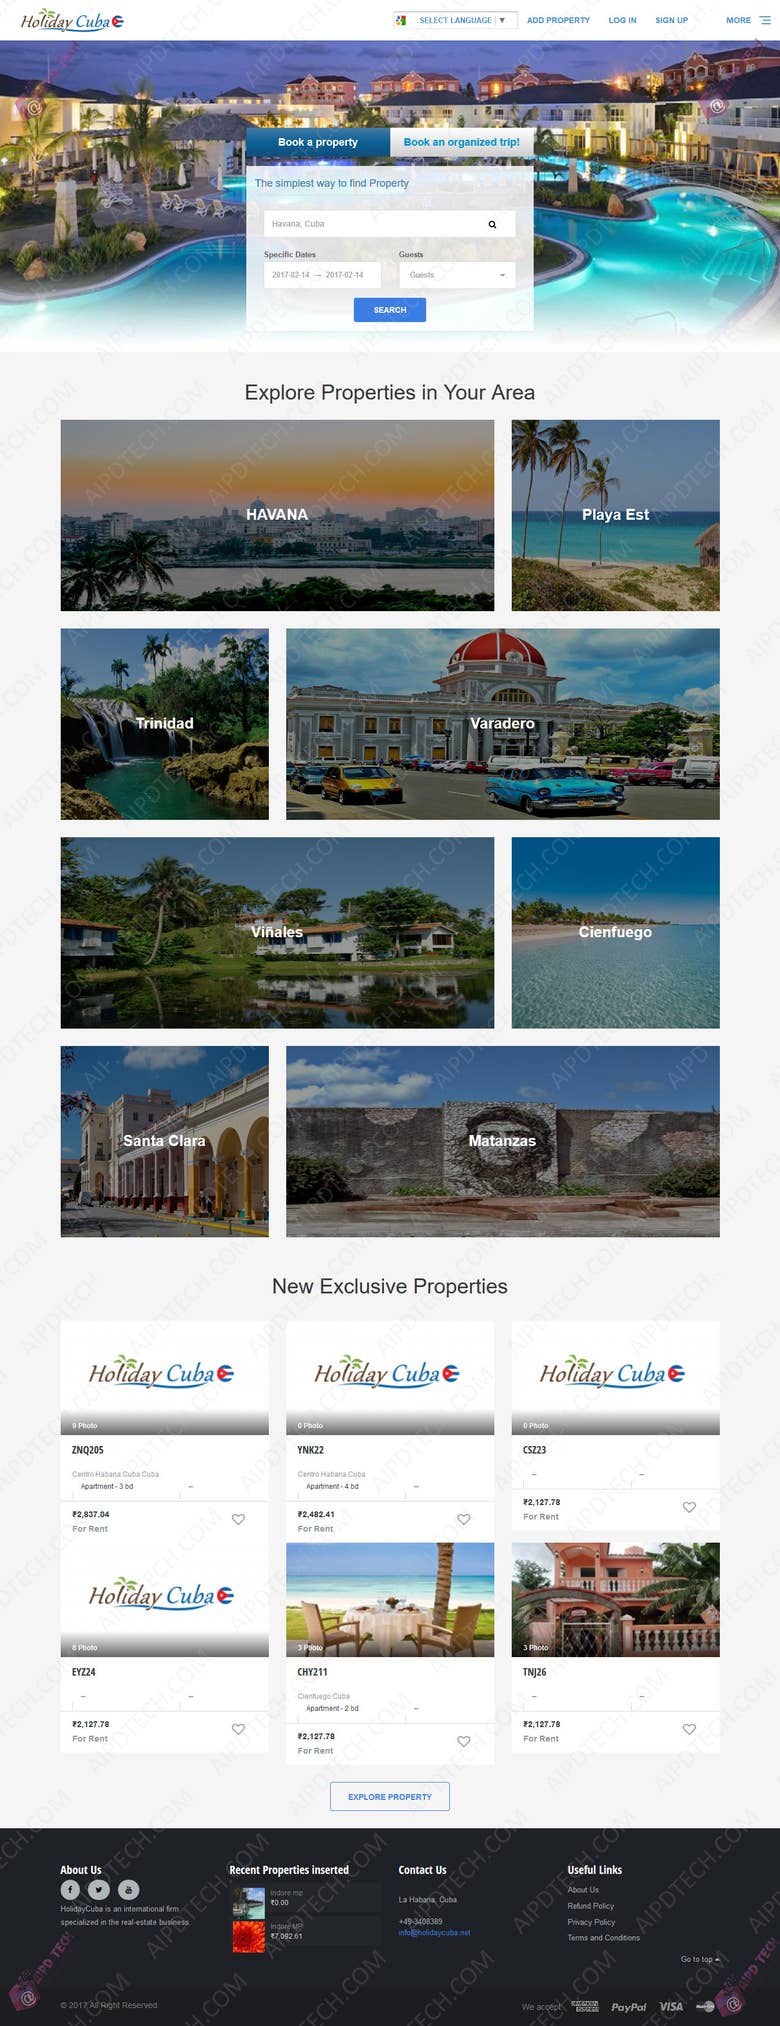 Holiday Cuba - Make Your Travelling Easiest